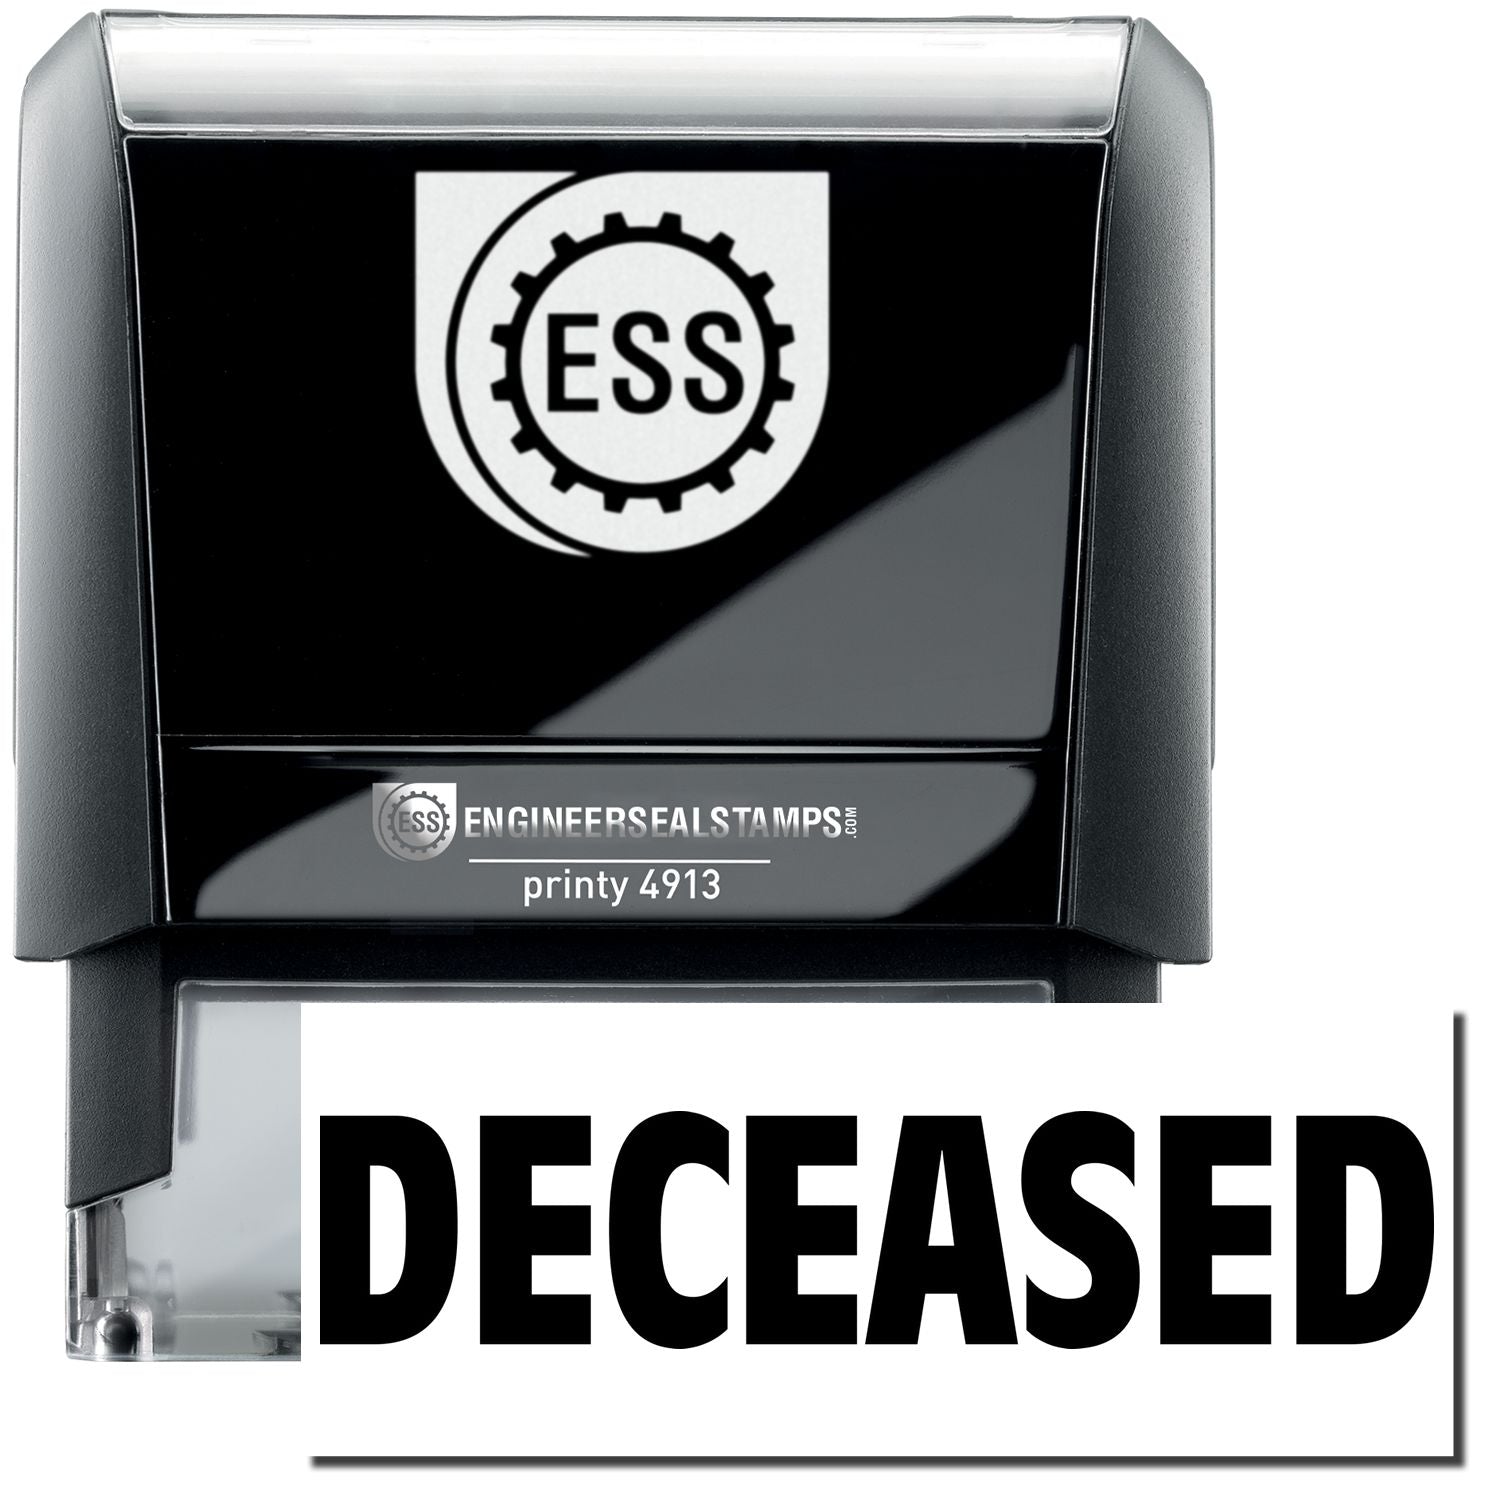 A self-inking stamp with a stamped image showing how the text "DECEASED" in a large font is displayed by it after stamping.